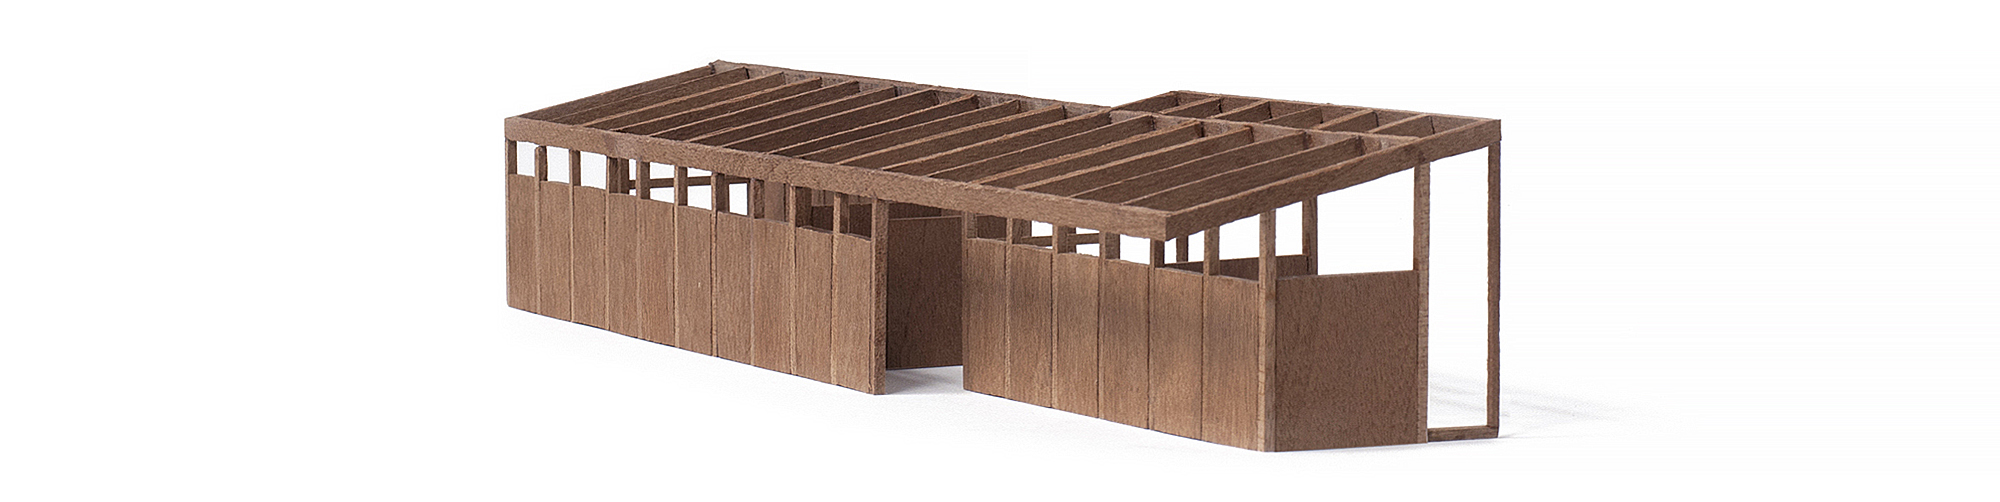 Erbar Mattes Architects Glisson Road Cambridge timber frame extension model